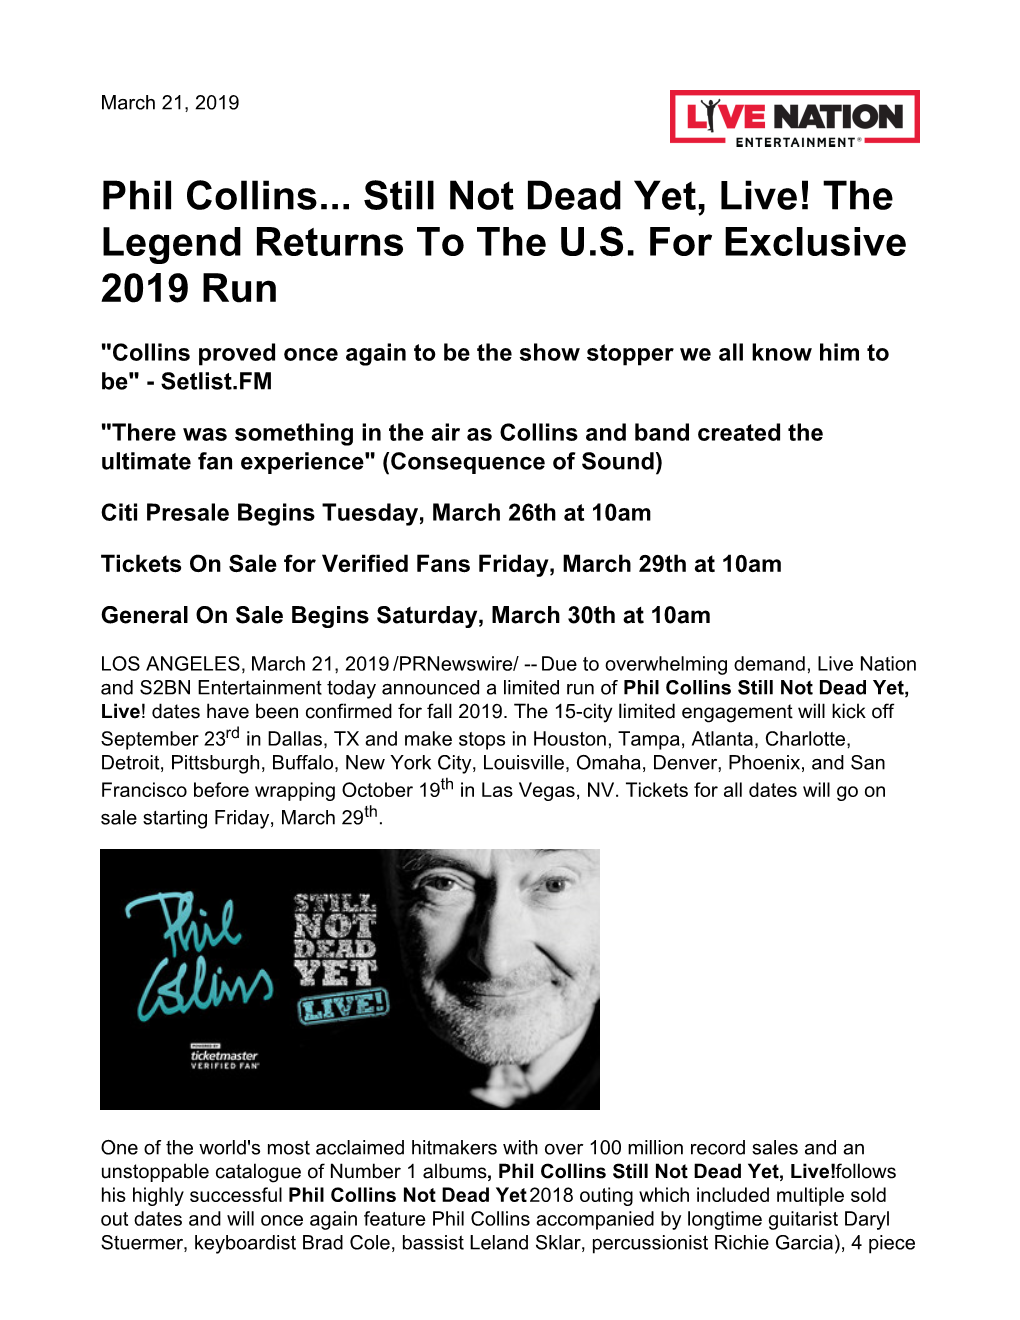 Phil Collins... Still Not Dead Yet, Live! the Legend Returns to the U.S